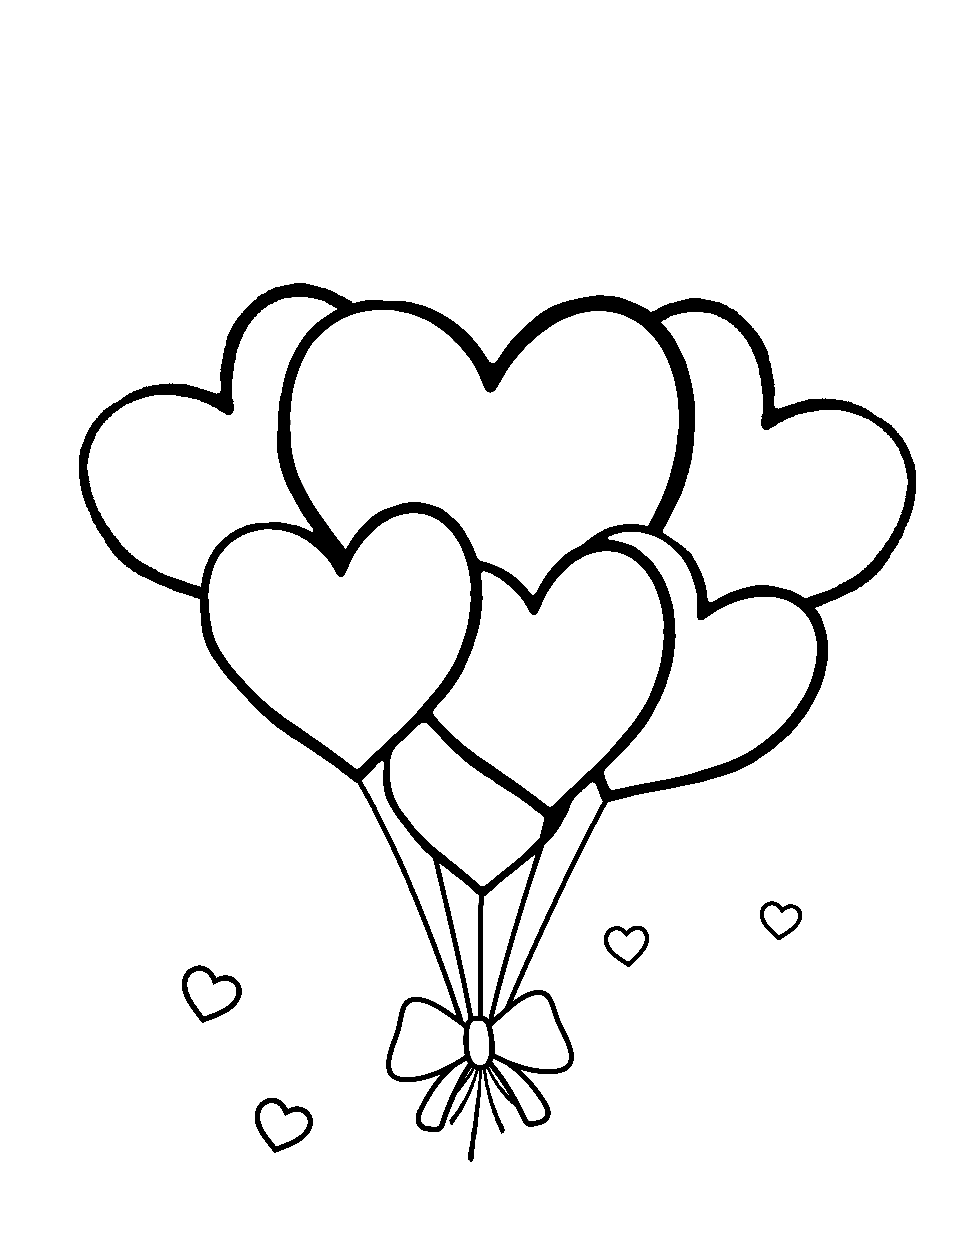 Celebration with Heart Balloons Coloring Page - A bunch of heart balloons with colorful ribbons.